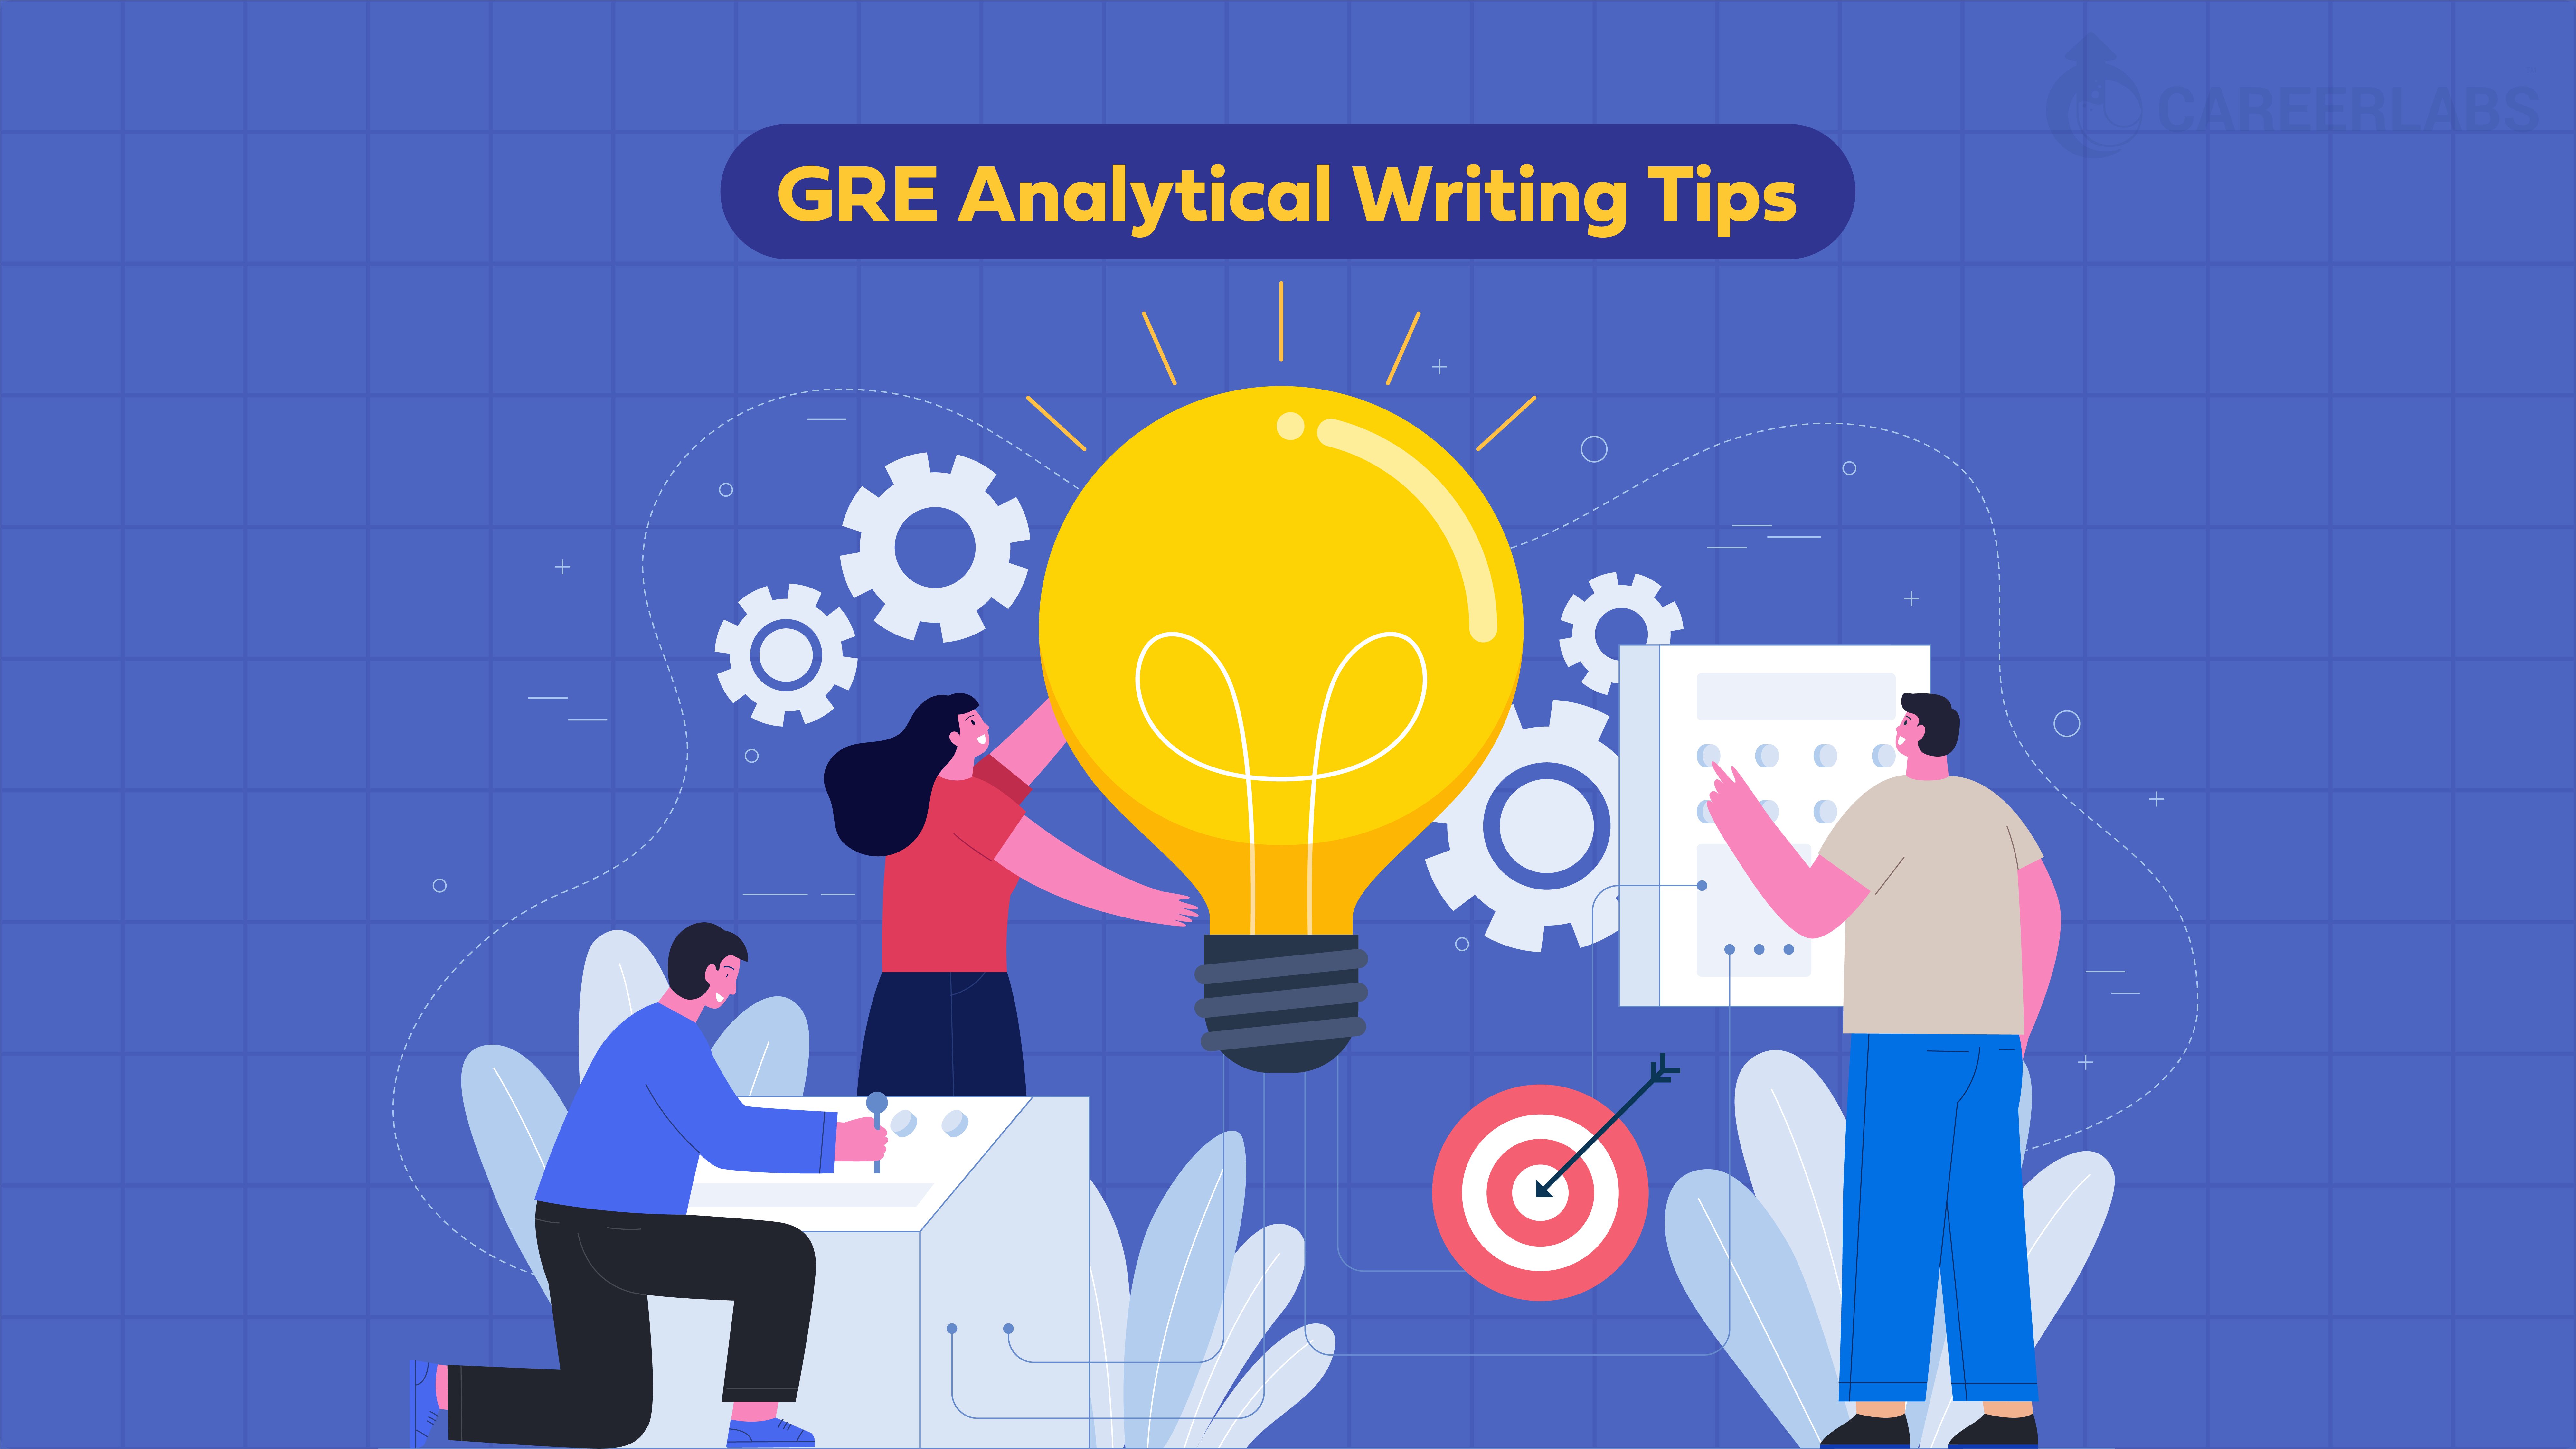 GRE Analytical Writing Tips